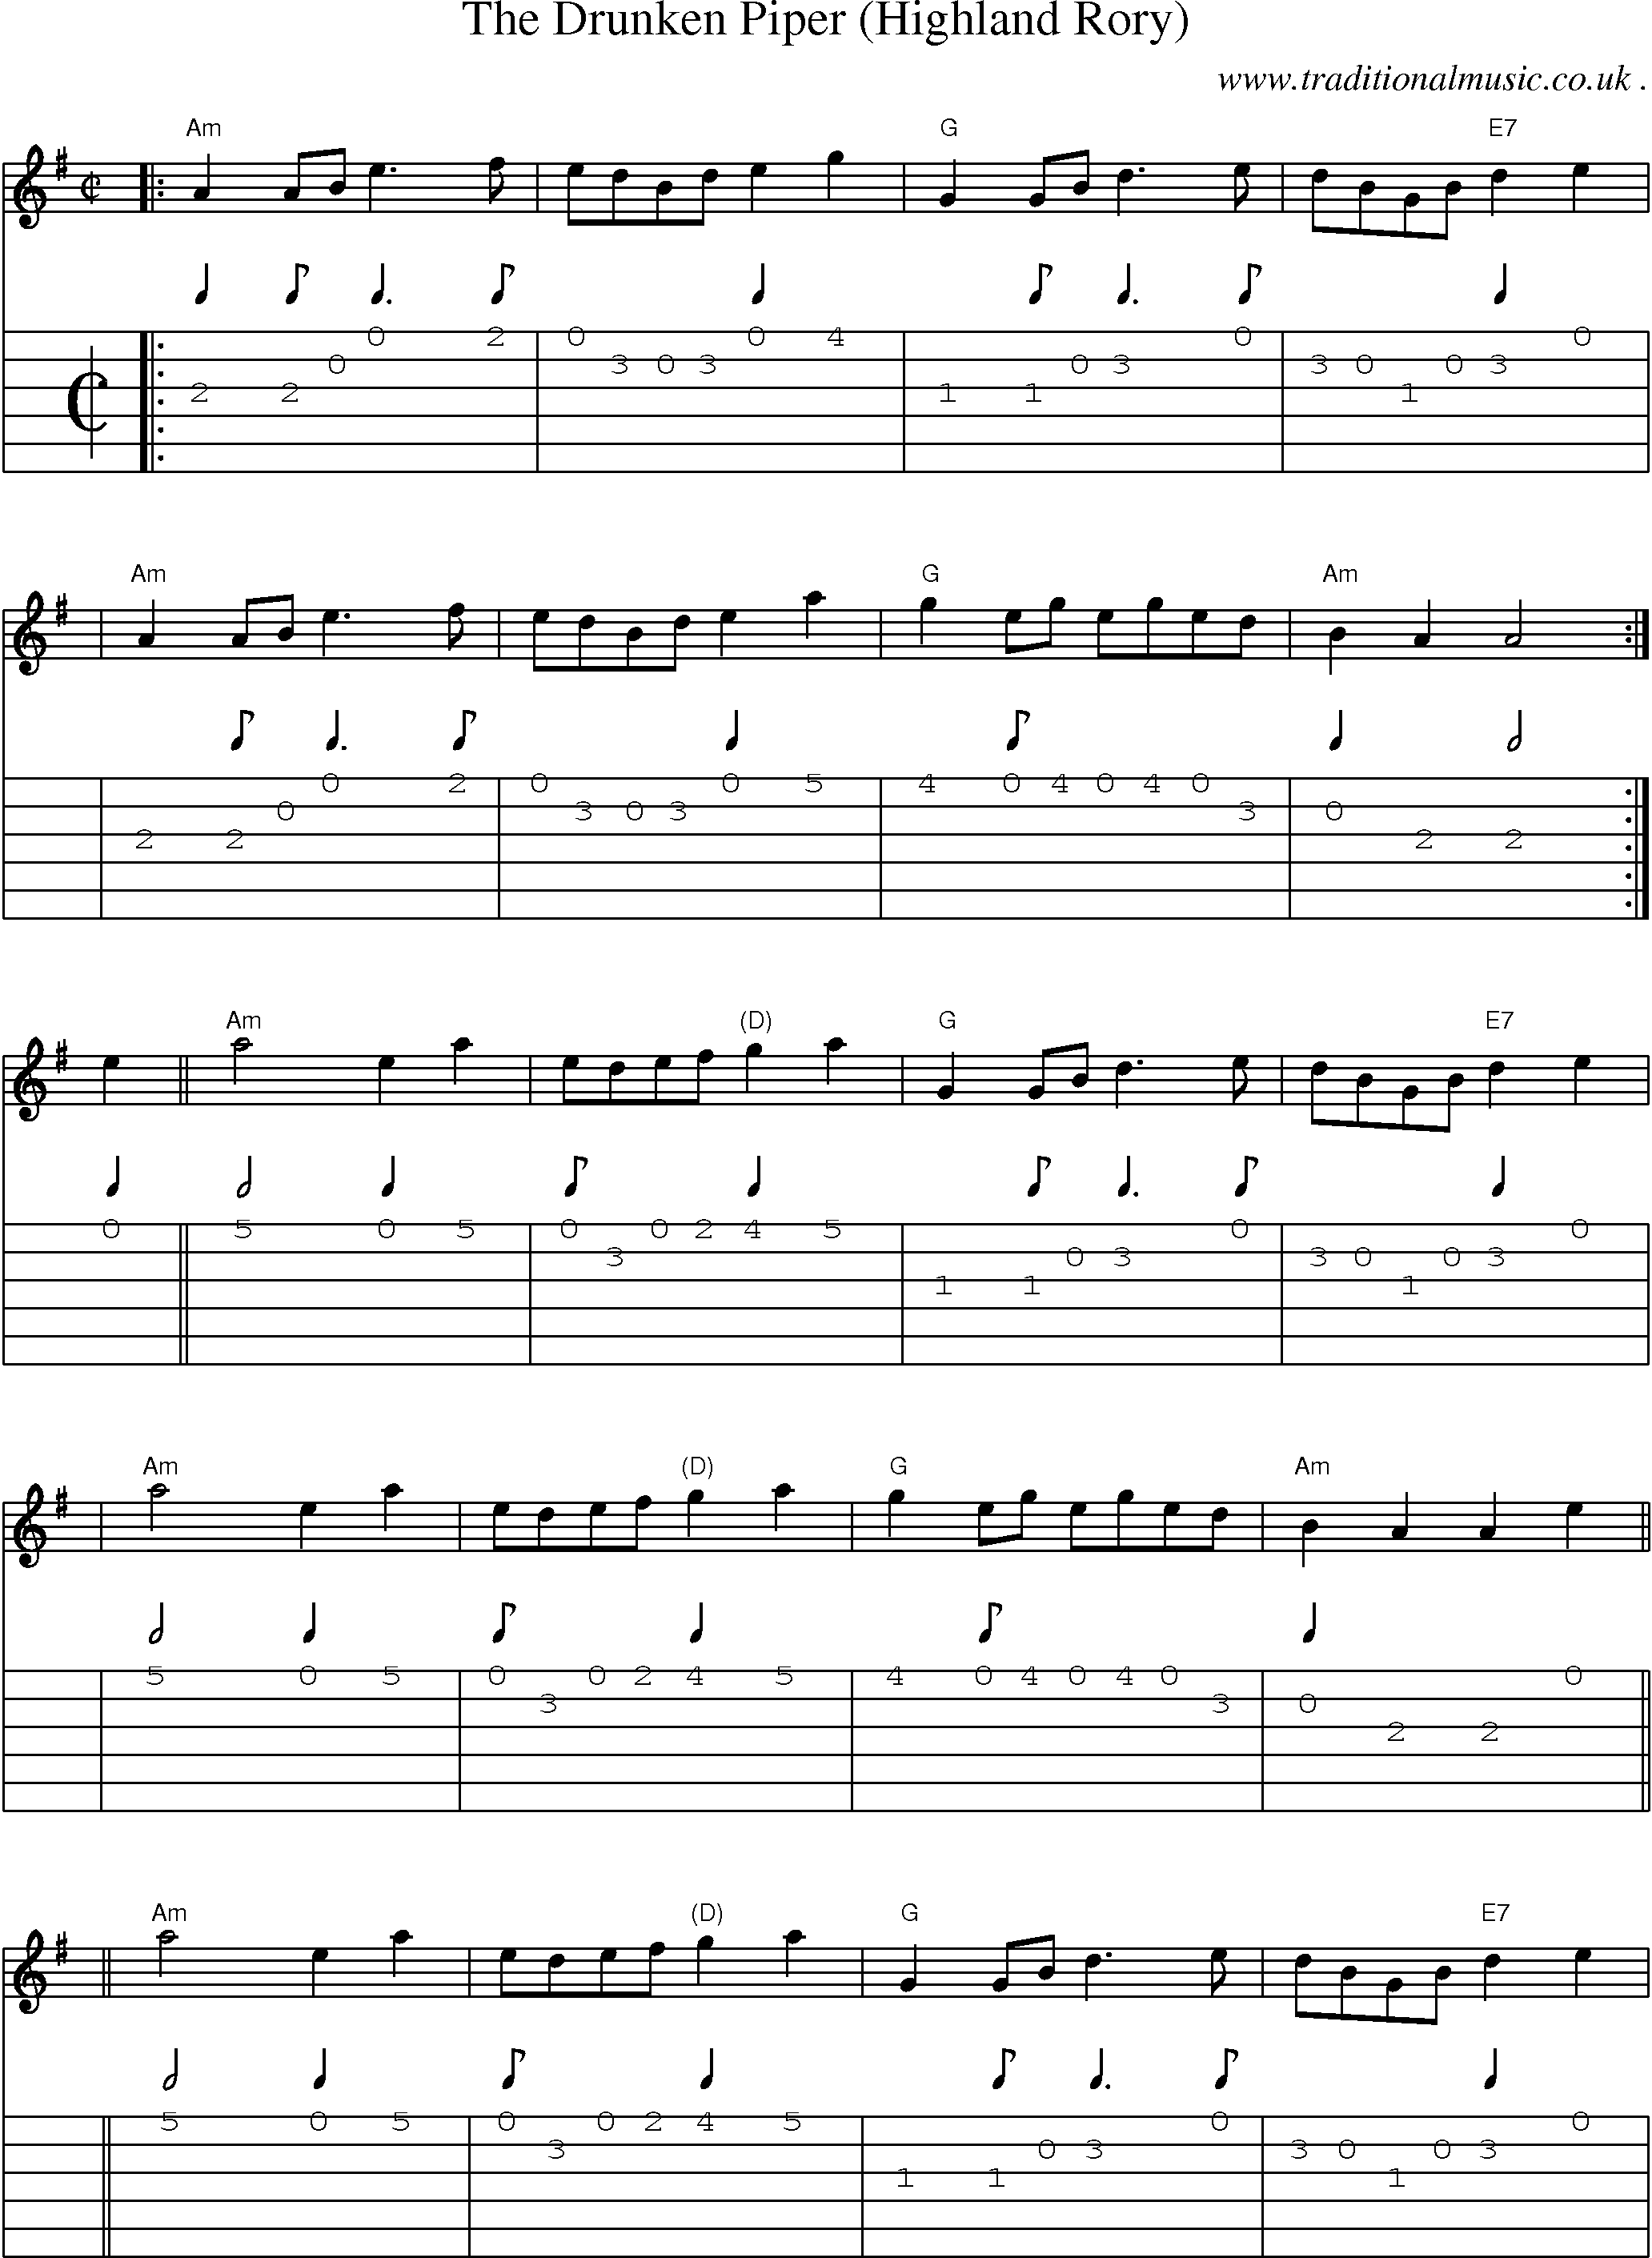 Sheet-Music and Guitar Tabs for The Drunken Piper (highland Rory)